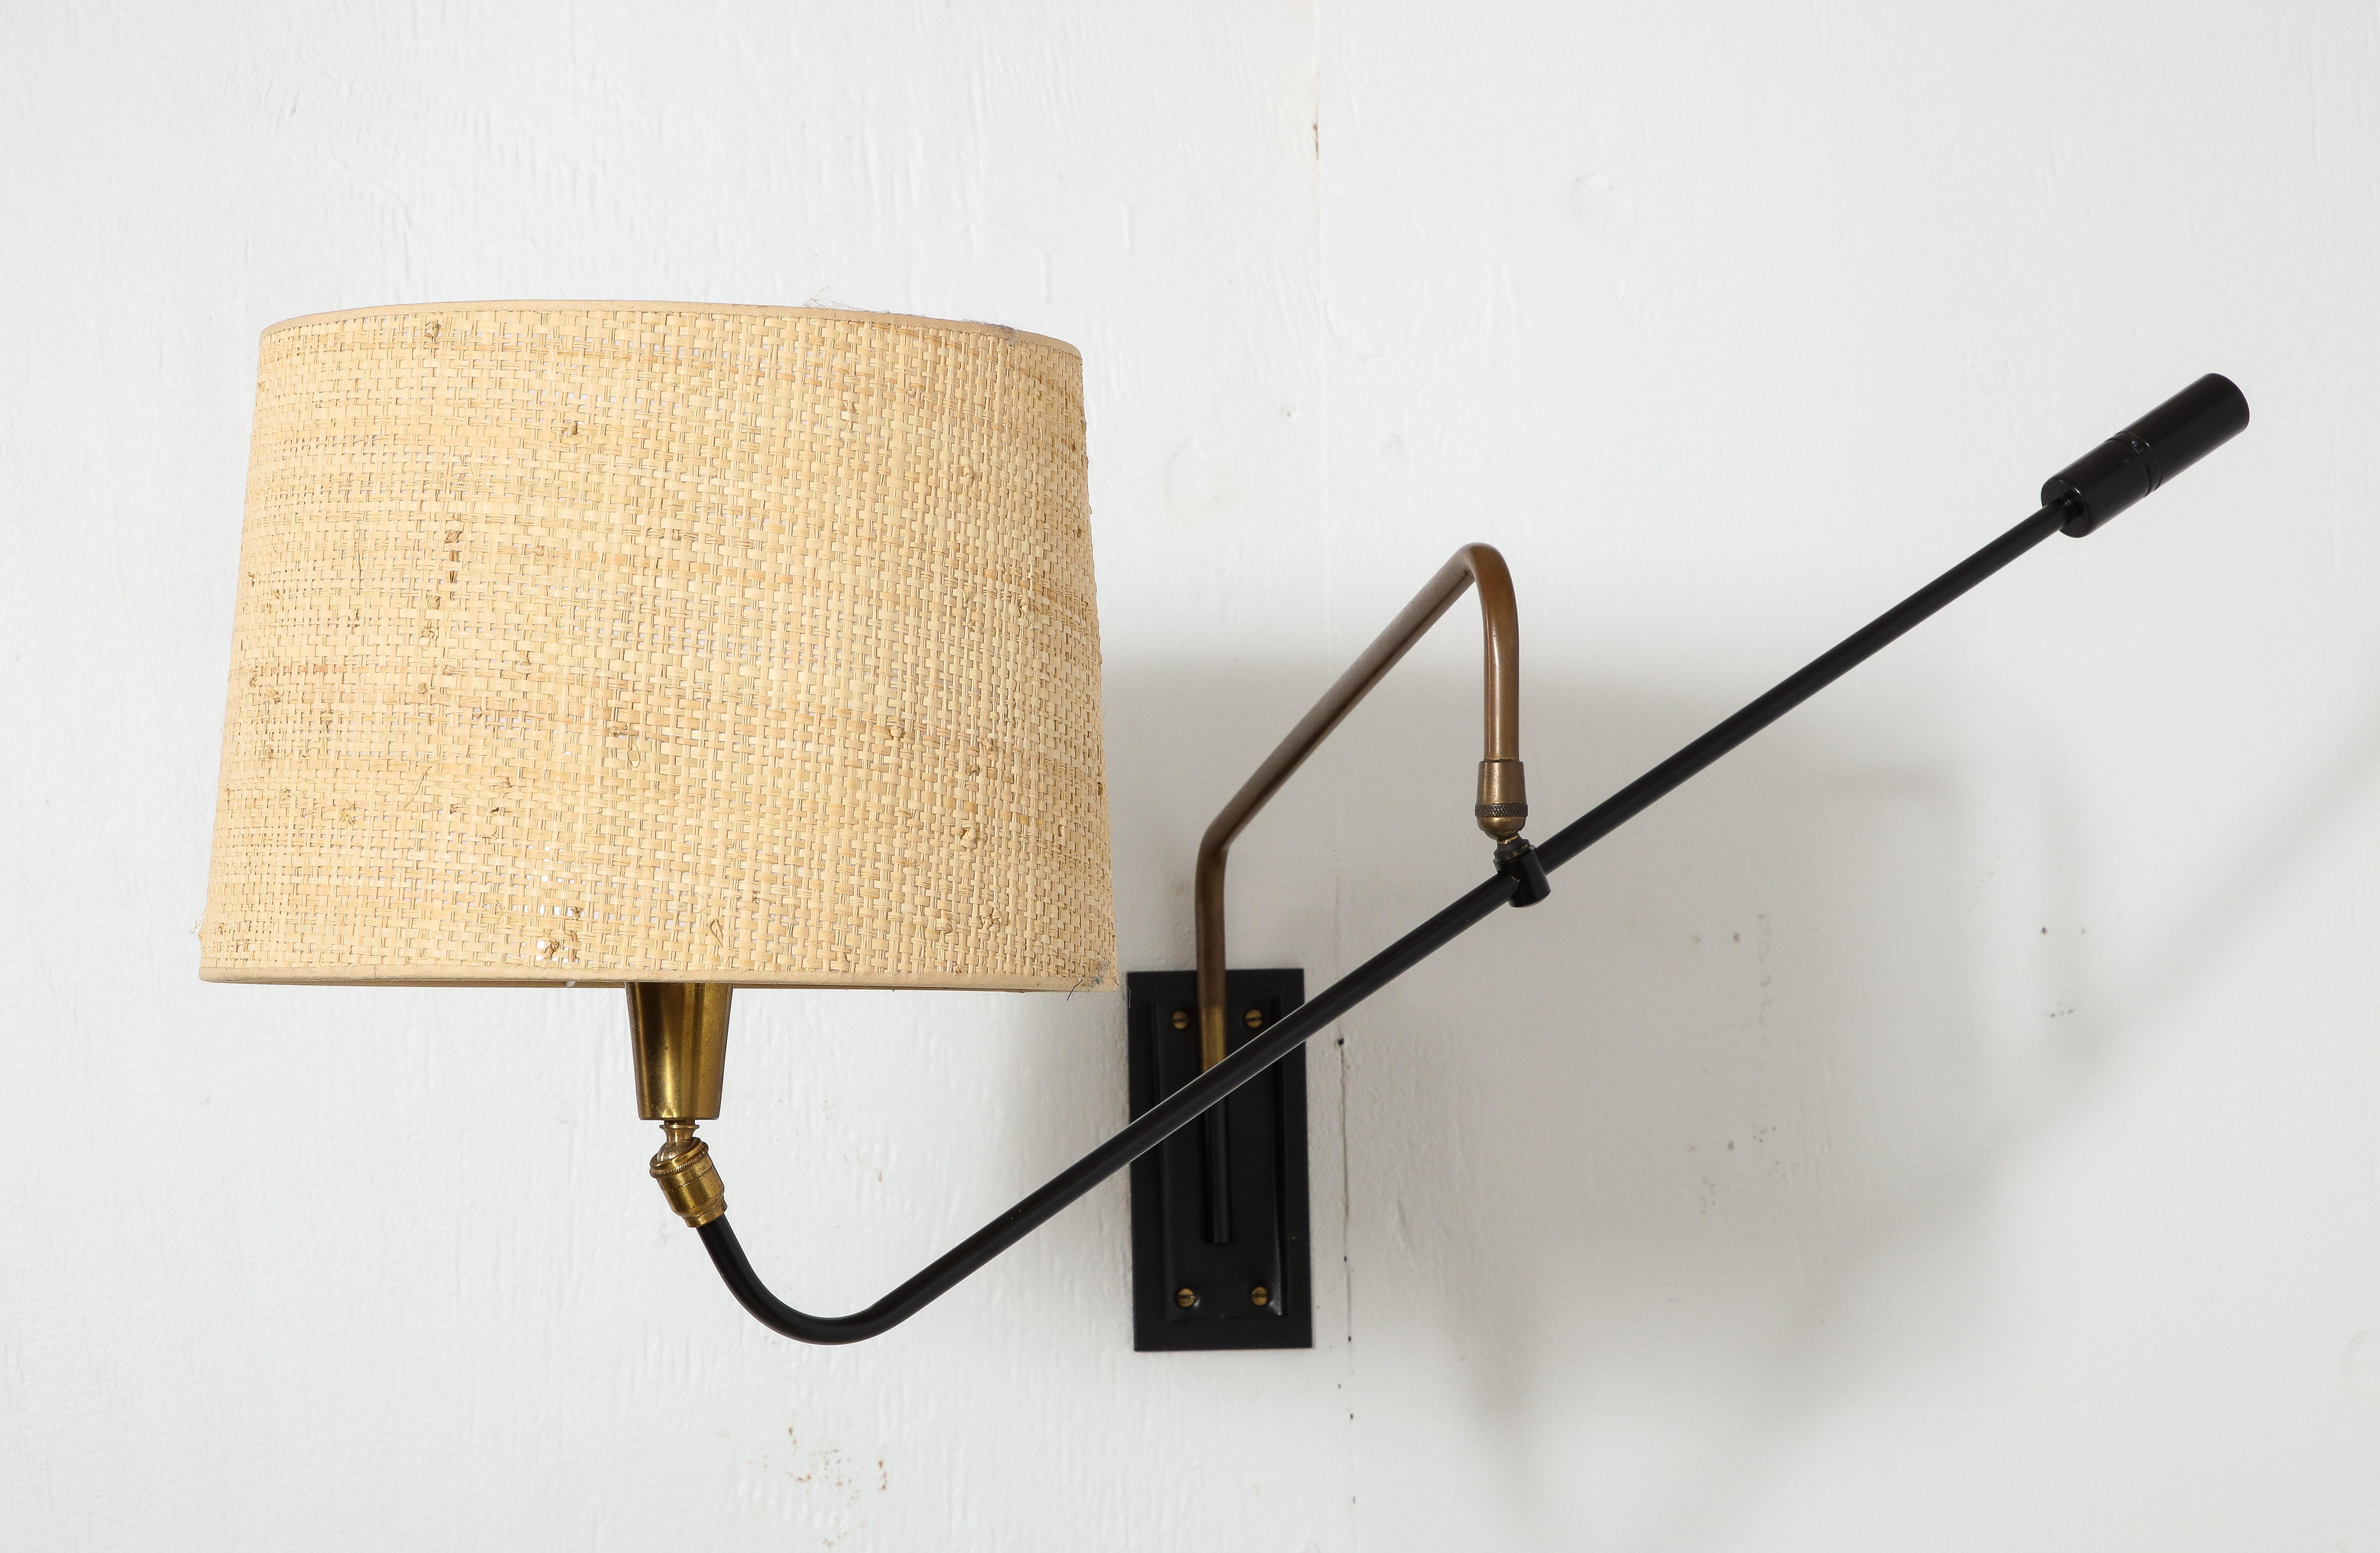 Single Lunel Uplight Swing Arm Sconce in Brass & Steel, France 1950's In Good Condition For Sale In New York, NY